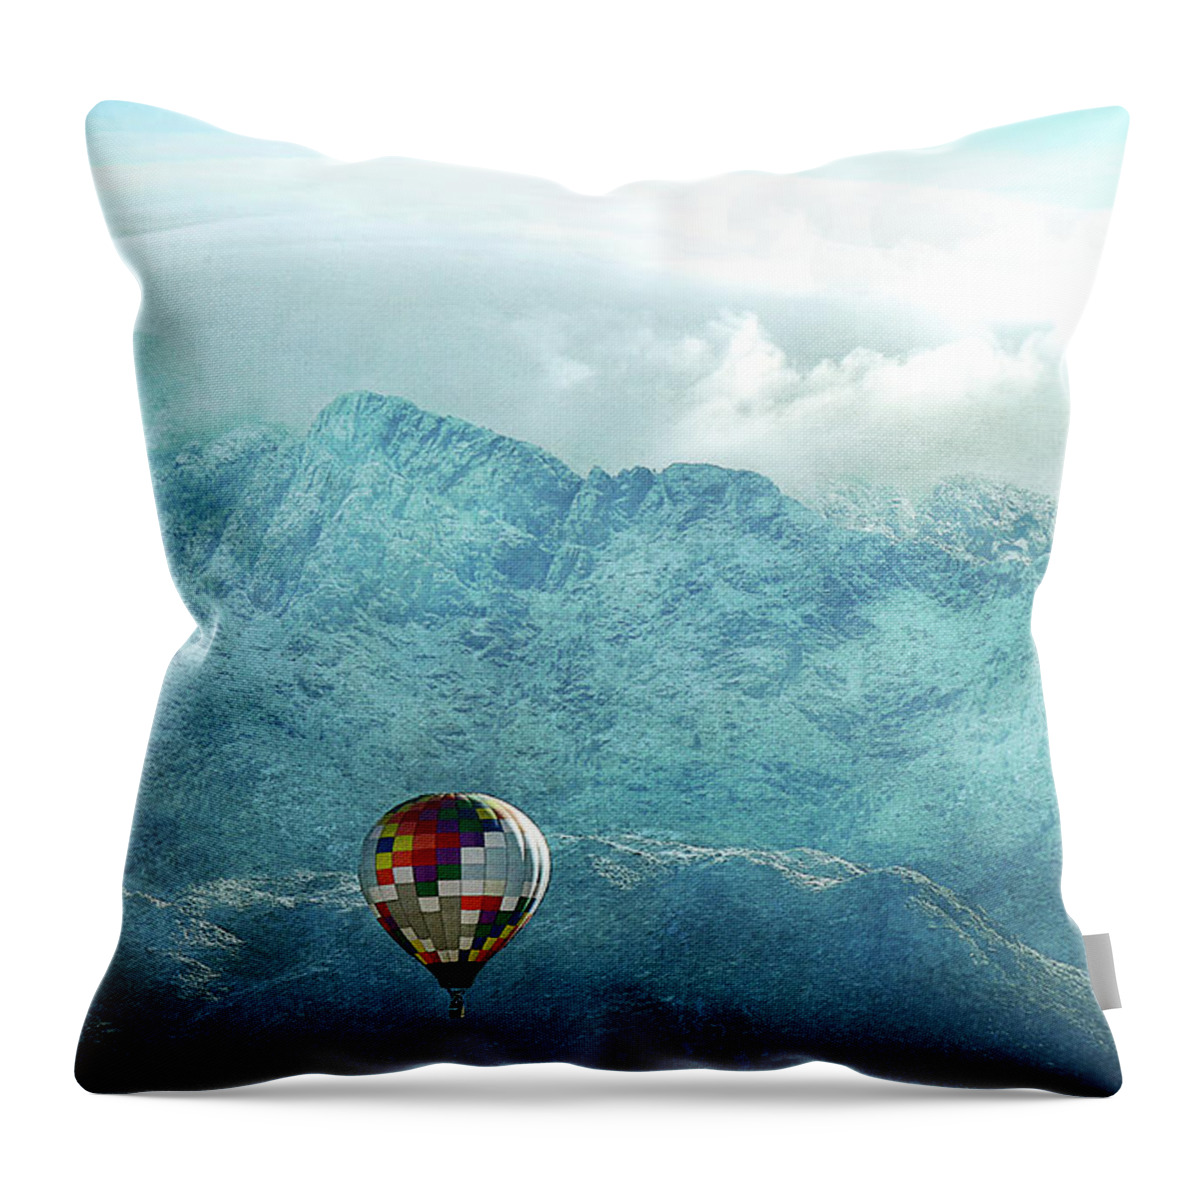 Tranquility Throw Pillow featuring the photograph Hot Air Balloon Mountain Snow by Cgander Photography